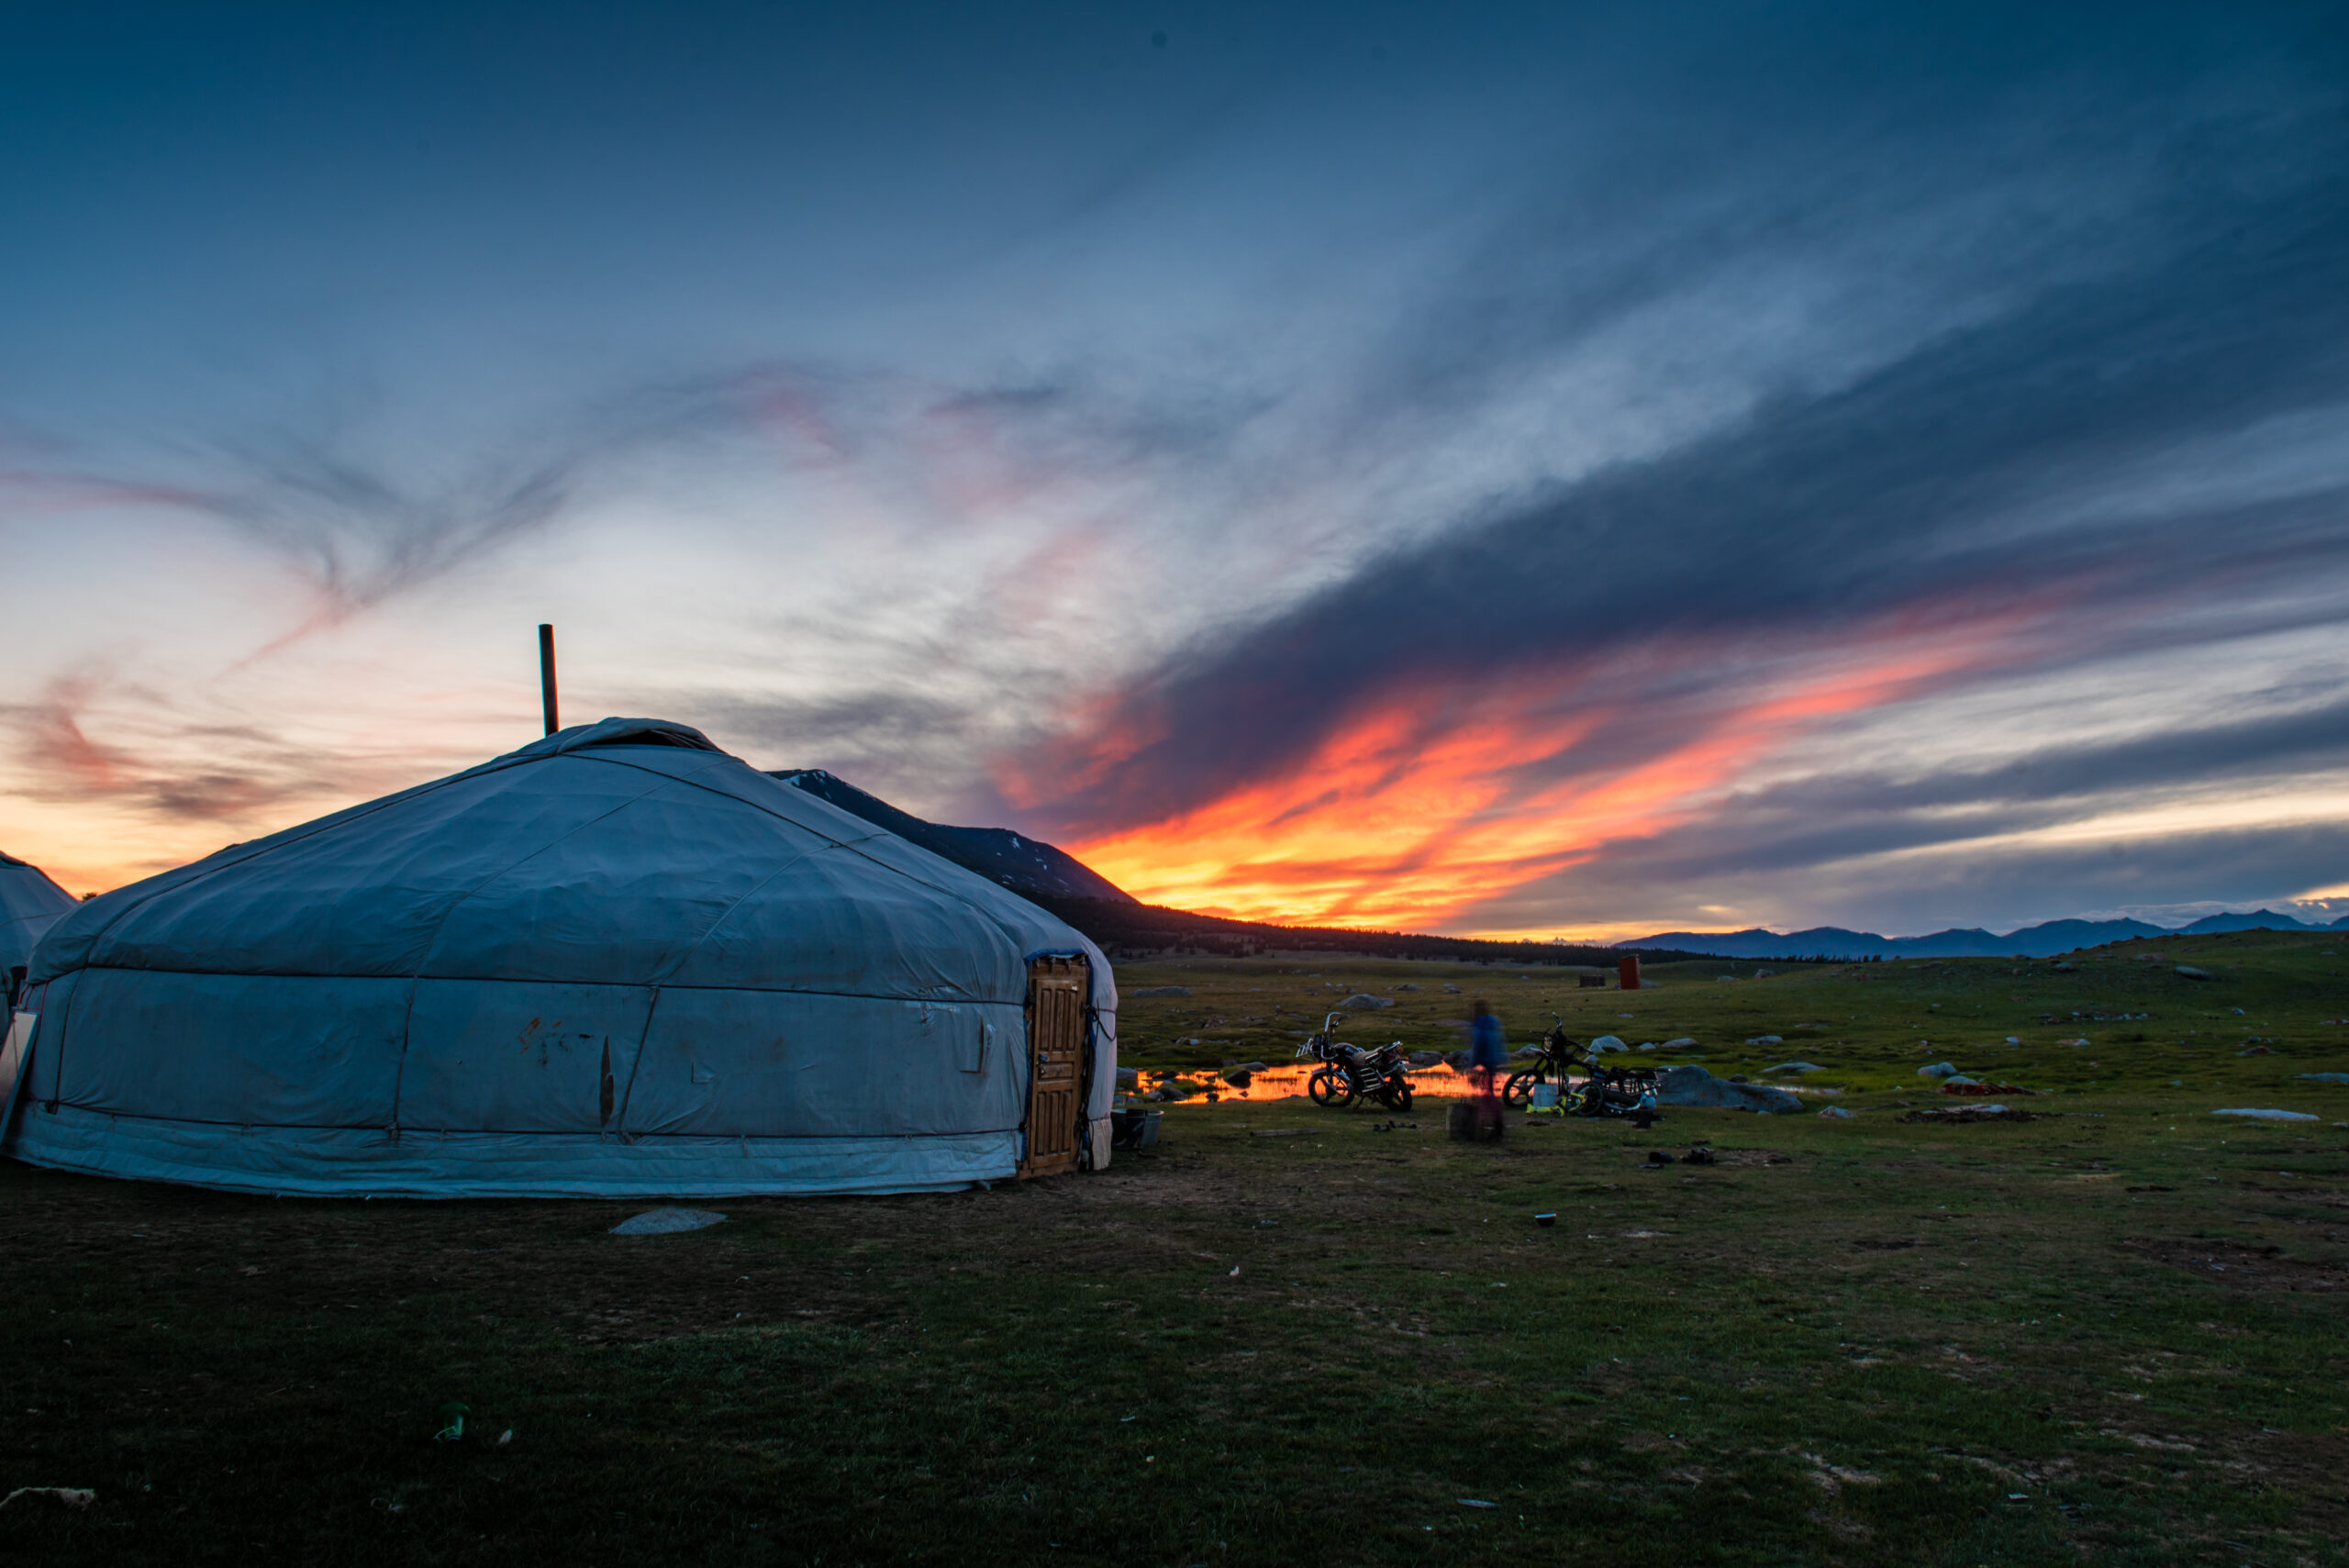 Unusual colors of the sky after the sunset in western Mongolia July 2020nI visited mr Khumisbek's family in 2020 and captured this photo.